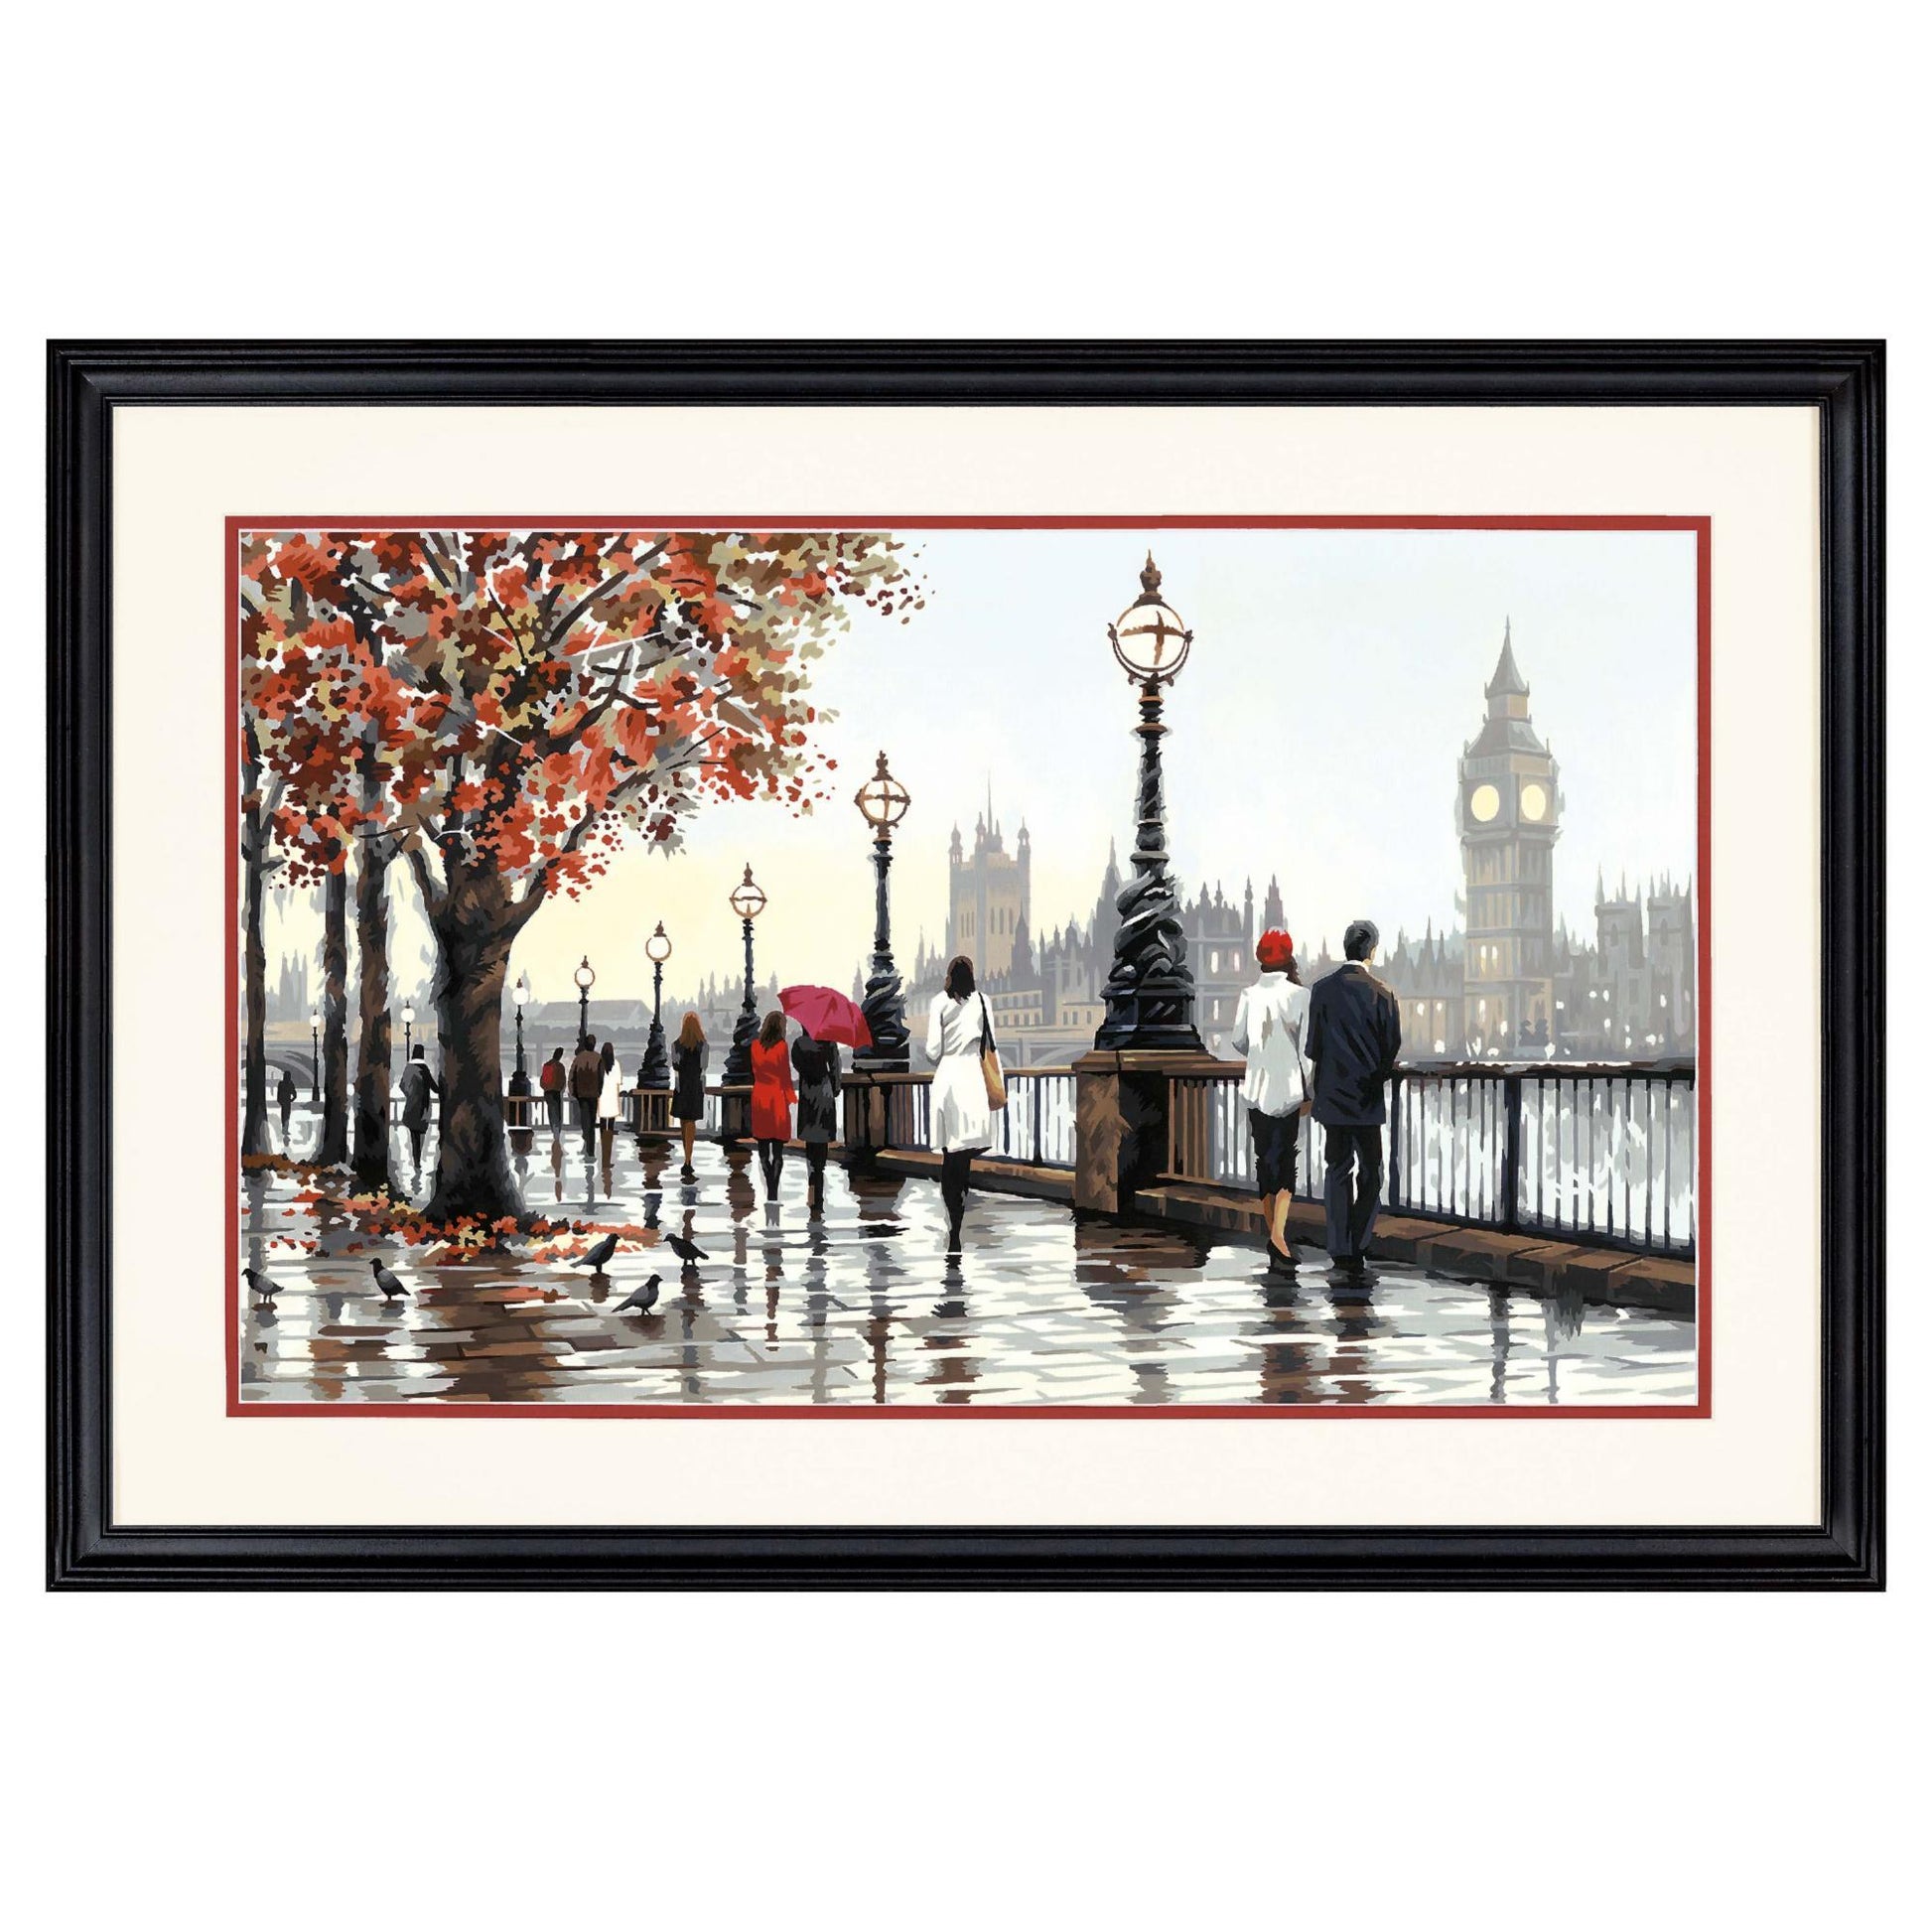 THAMES VIEW, Paint by Number Kit, DIMENSIONS PAINTWORKS (73-91732) - Leo Hobby